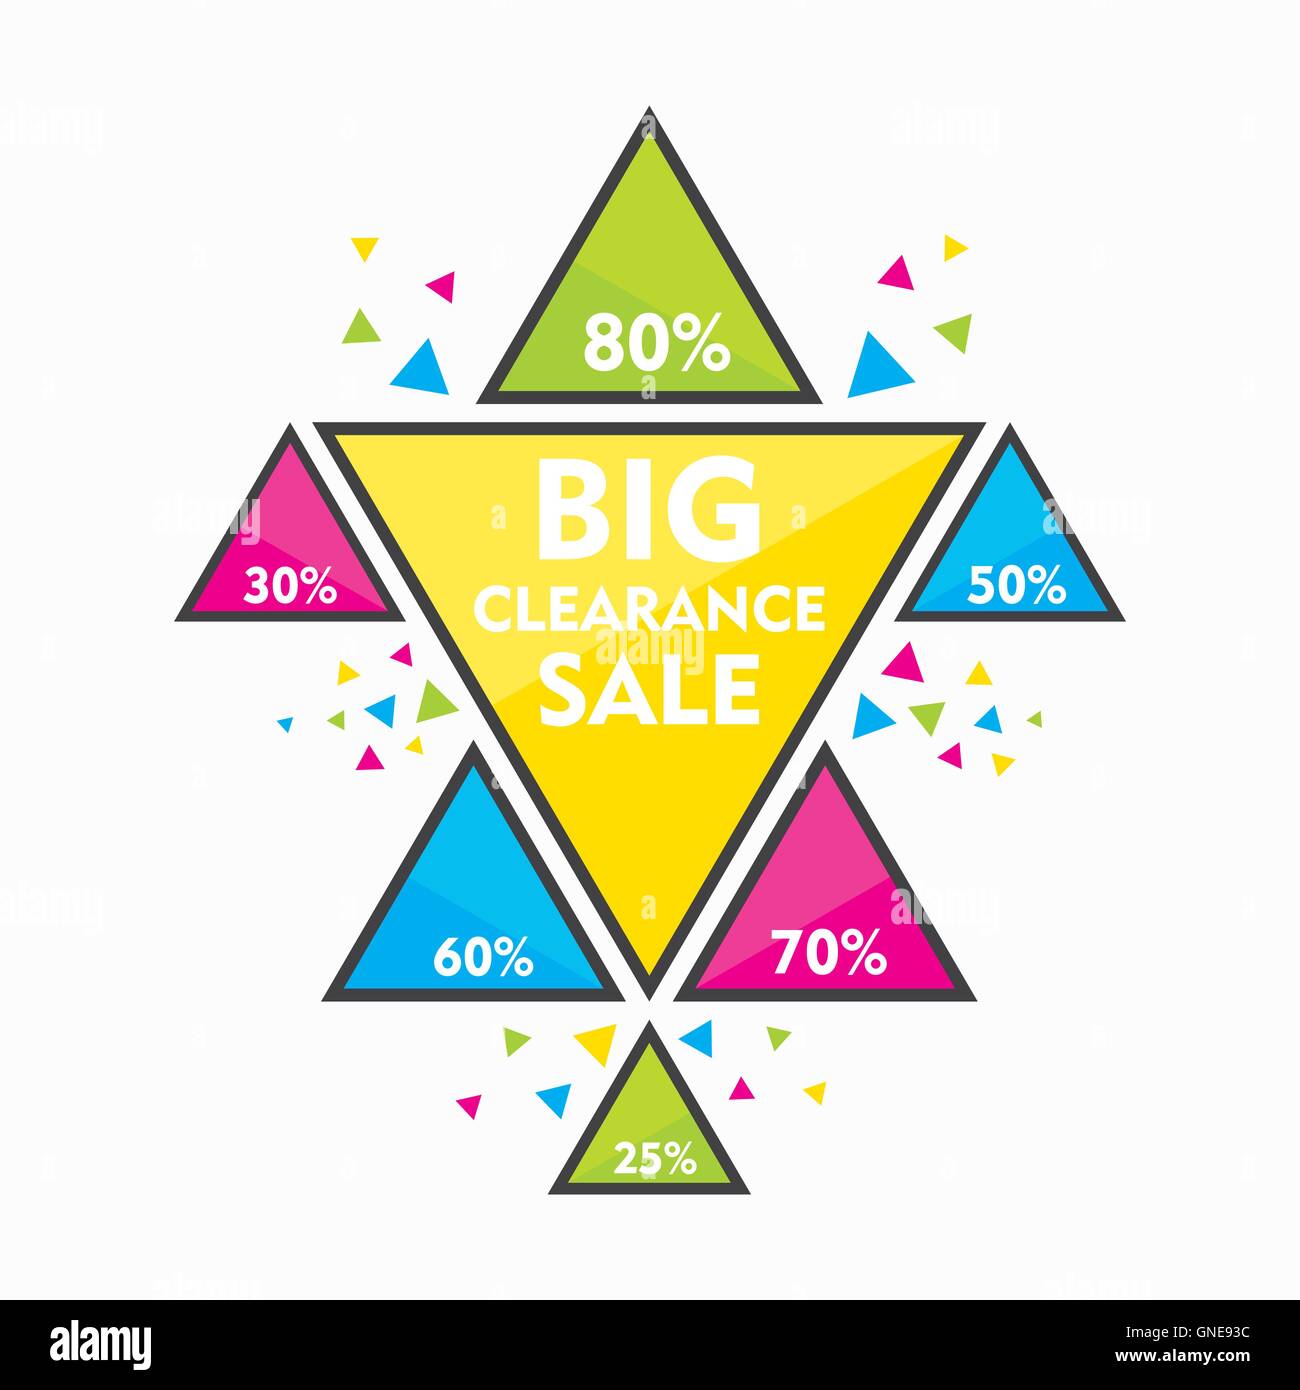 Clearance sale sign Stock Vector Images - Alamy